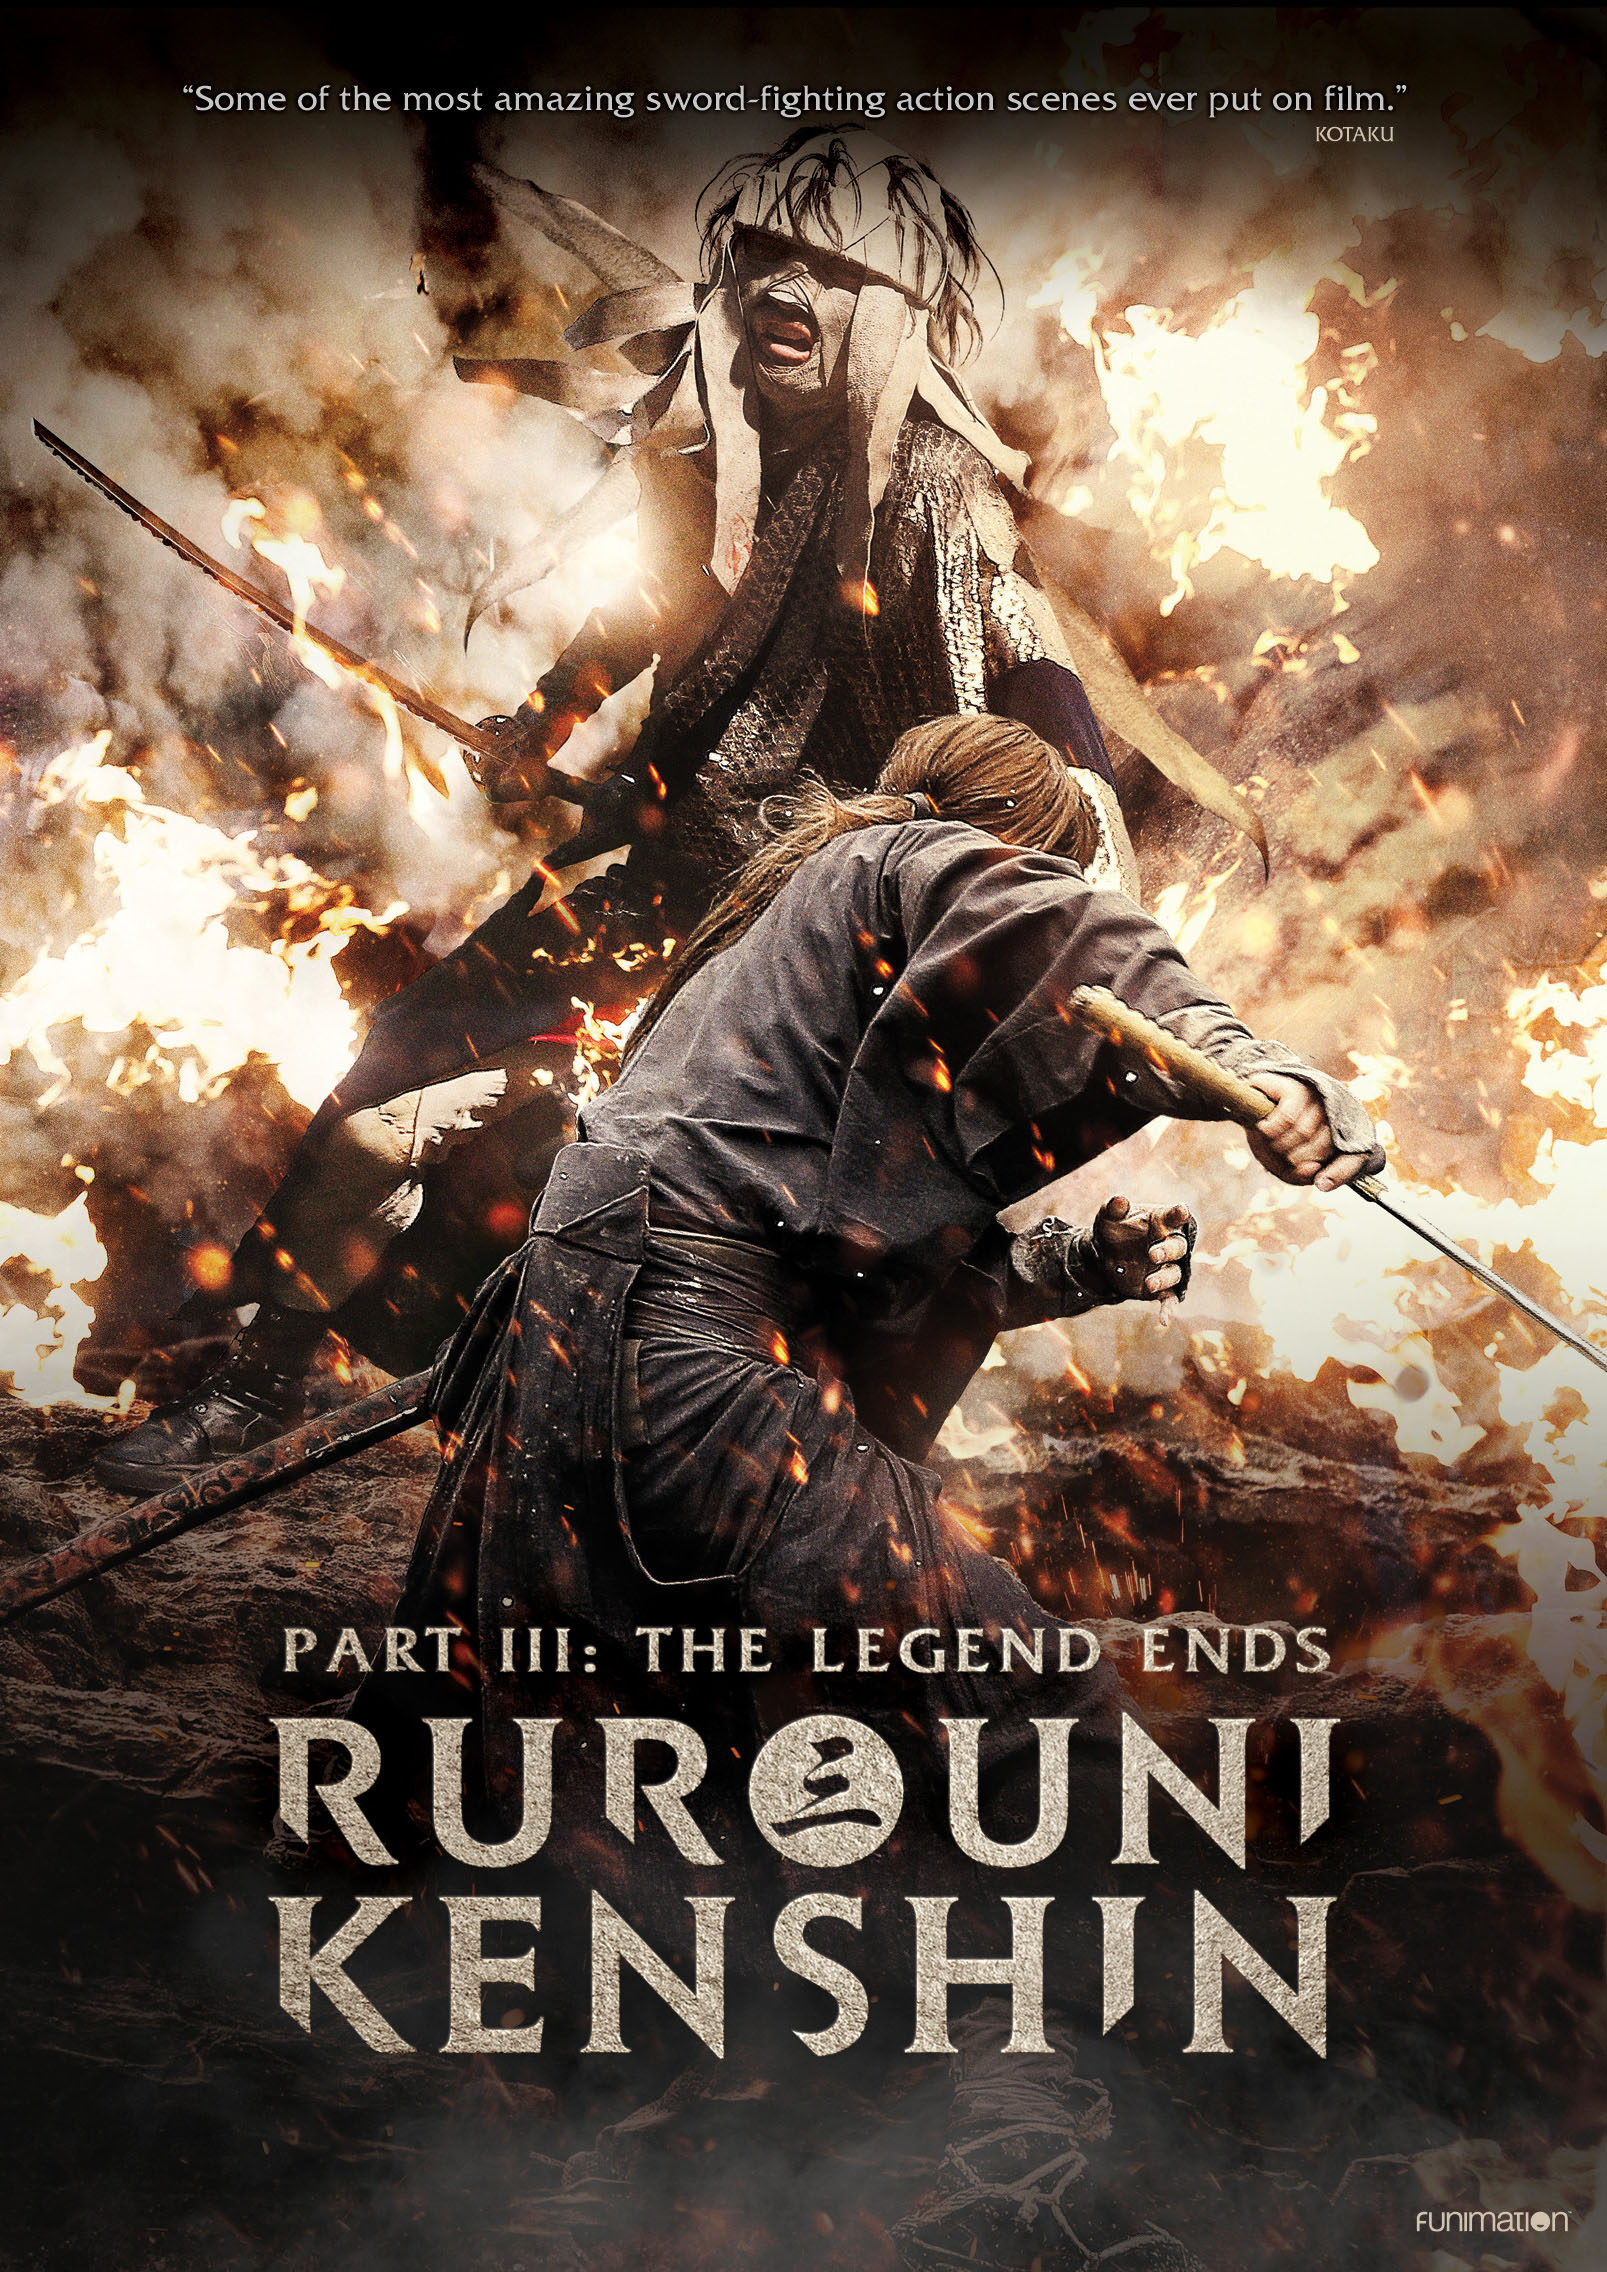 Movie Review] 'Rurouni Kenshin: The Final' is full of great fights